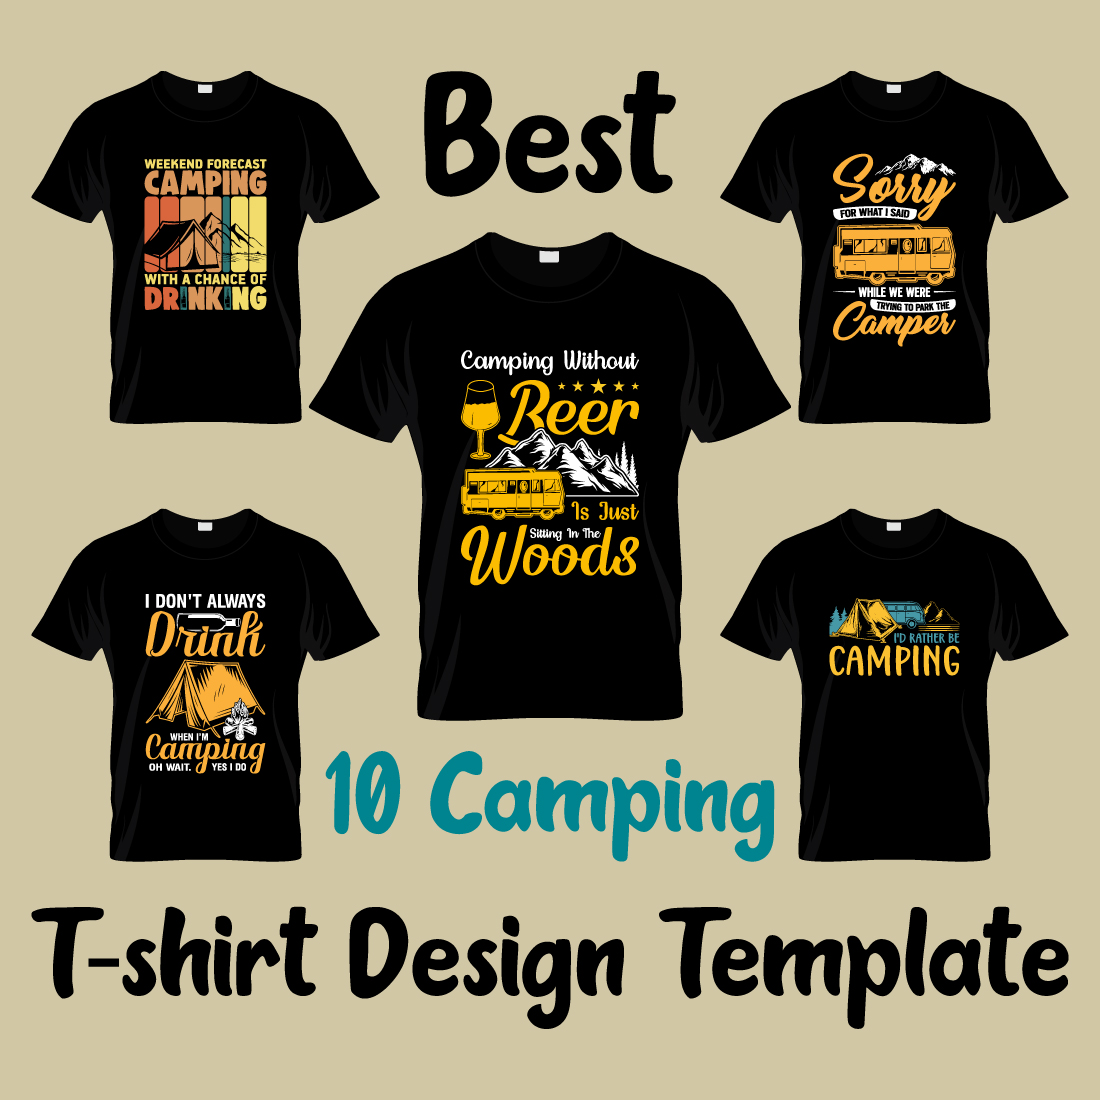 Best camping t-shirt design template with png files preview image.